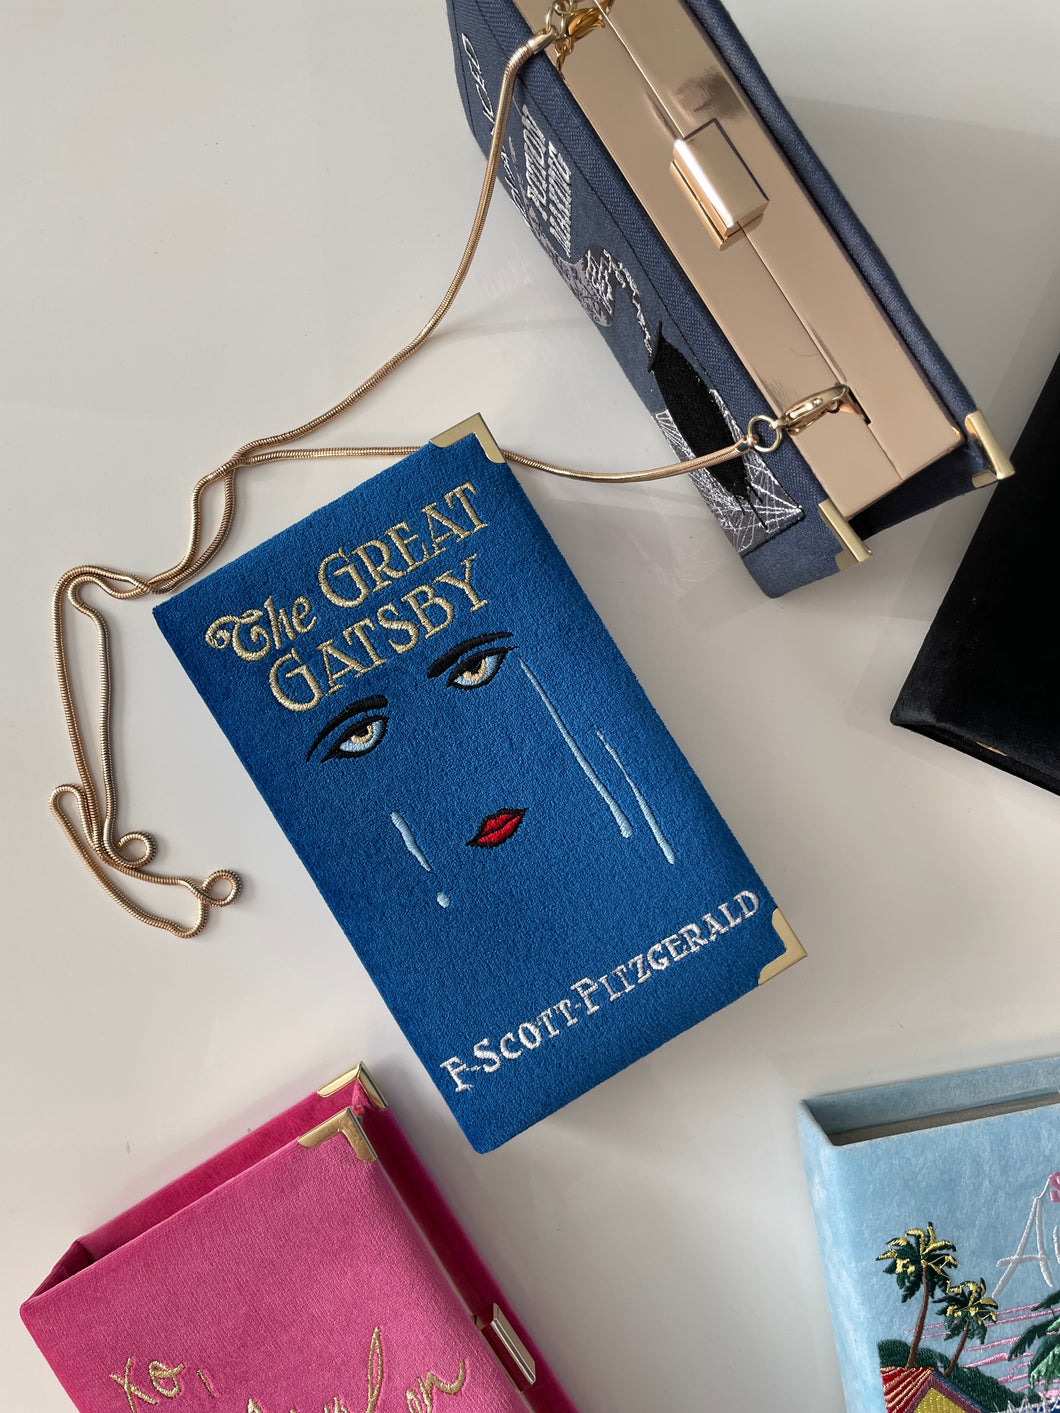 Embroidered Book Clutch - The Great Gatsby